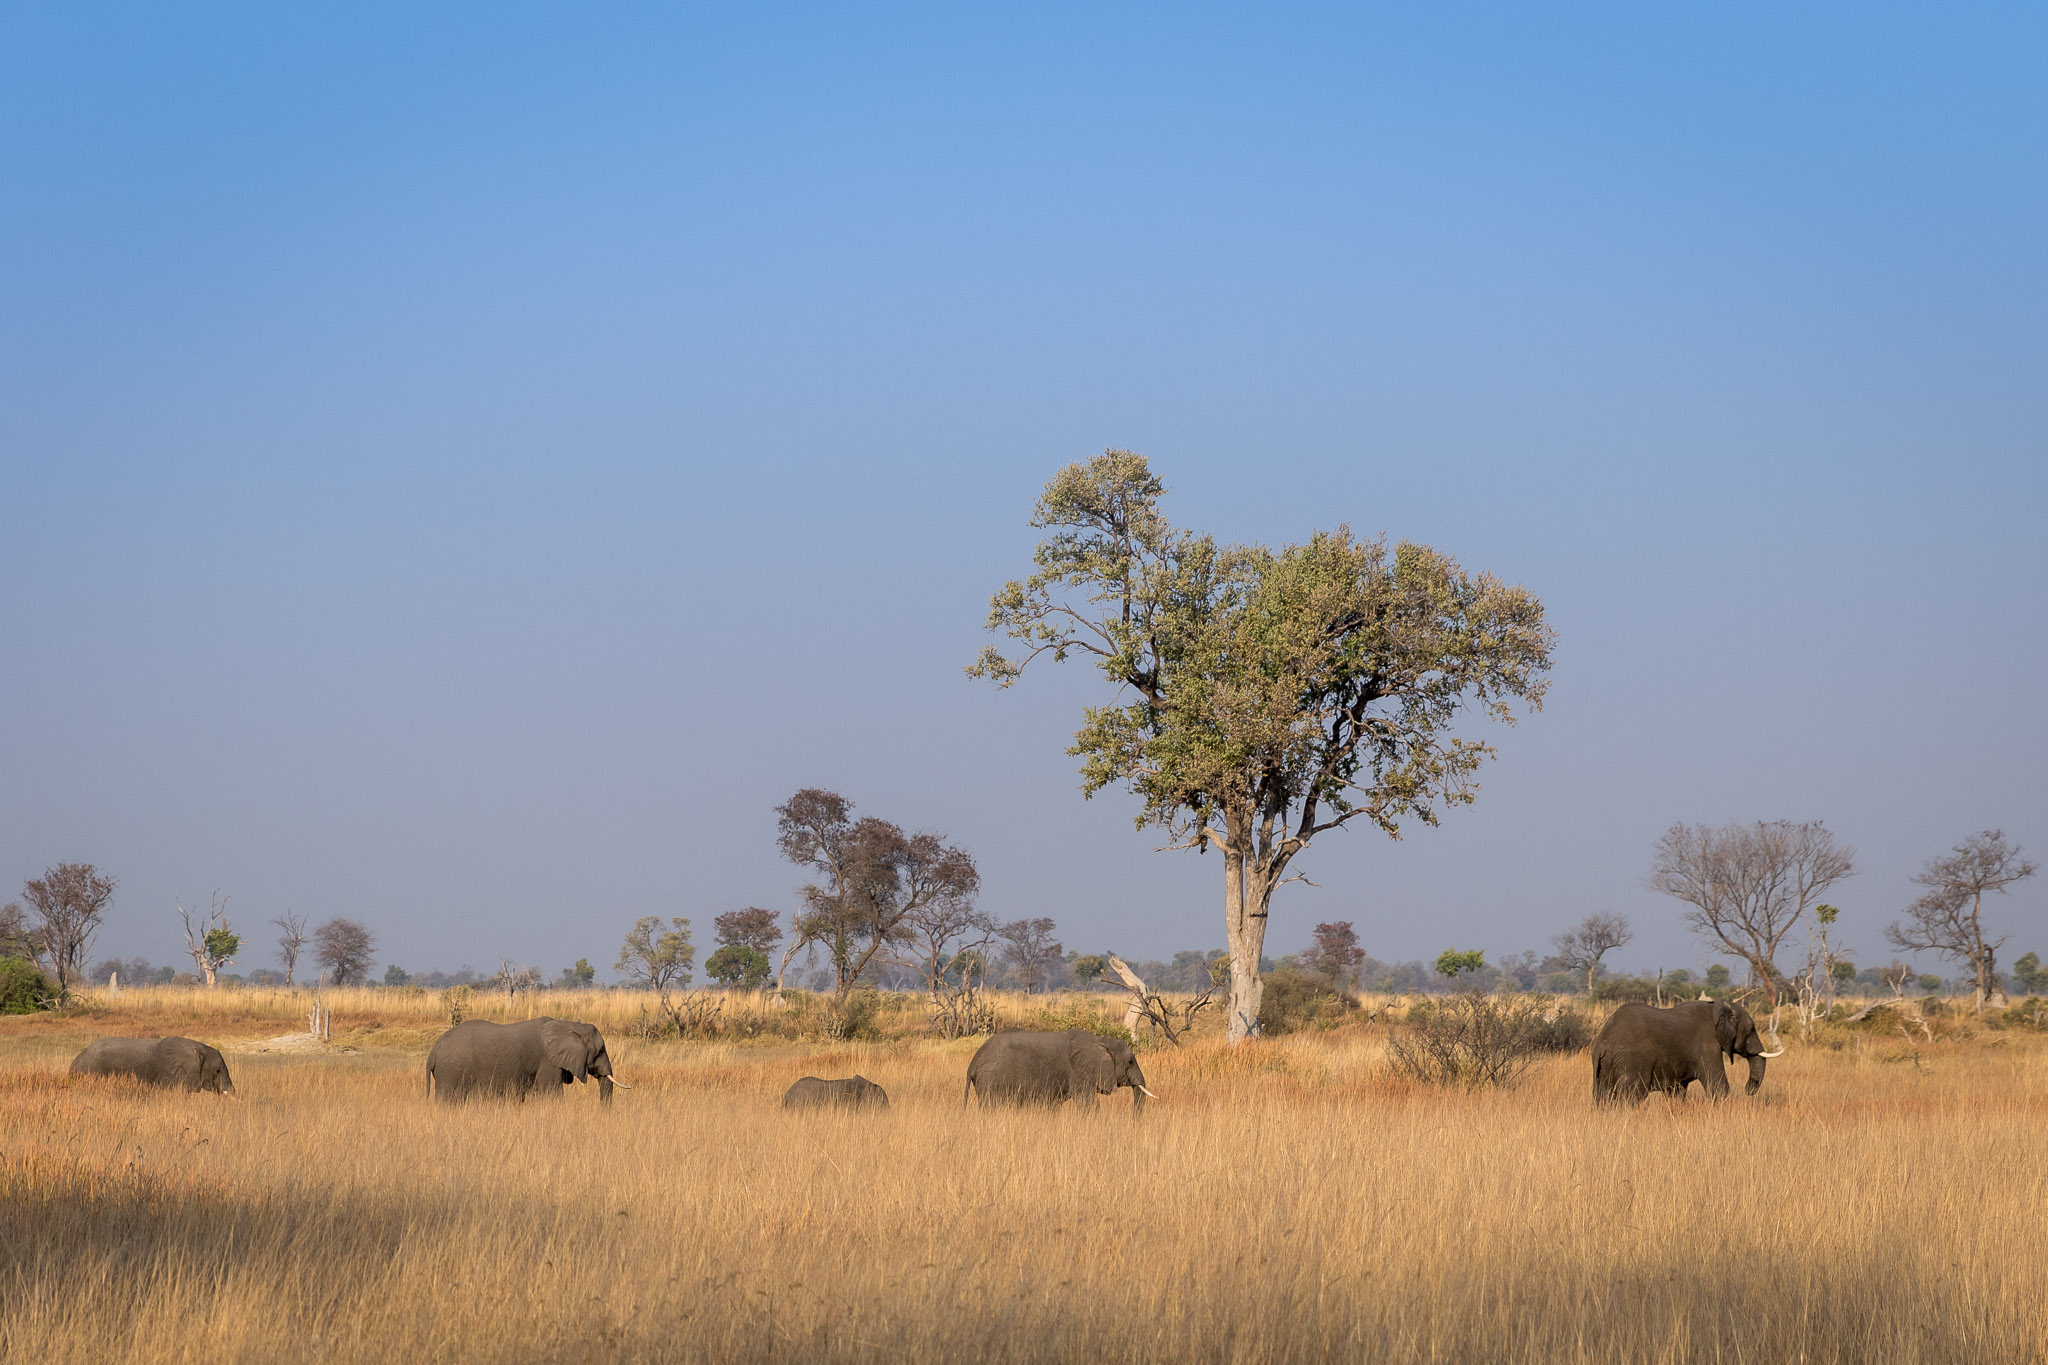 Elephants in Moremi Game Reserve